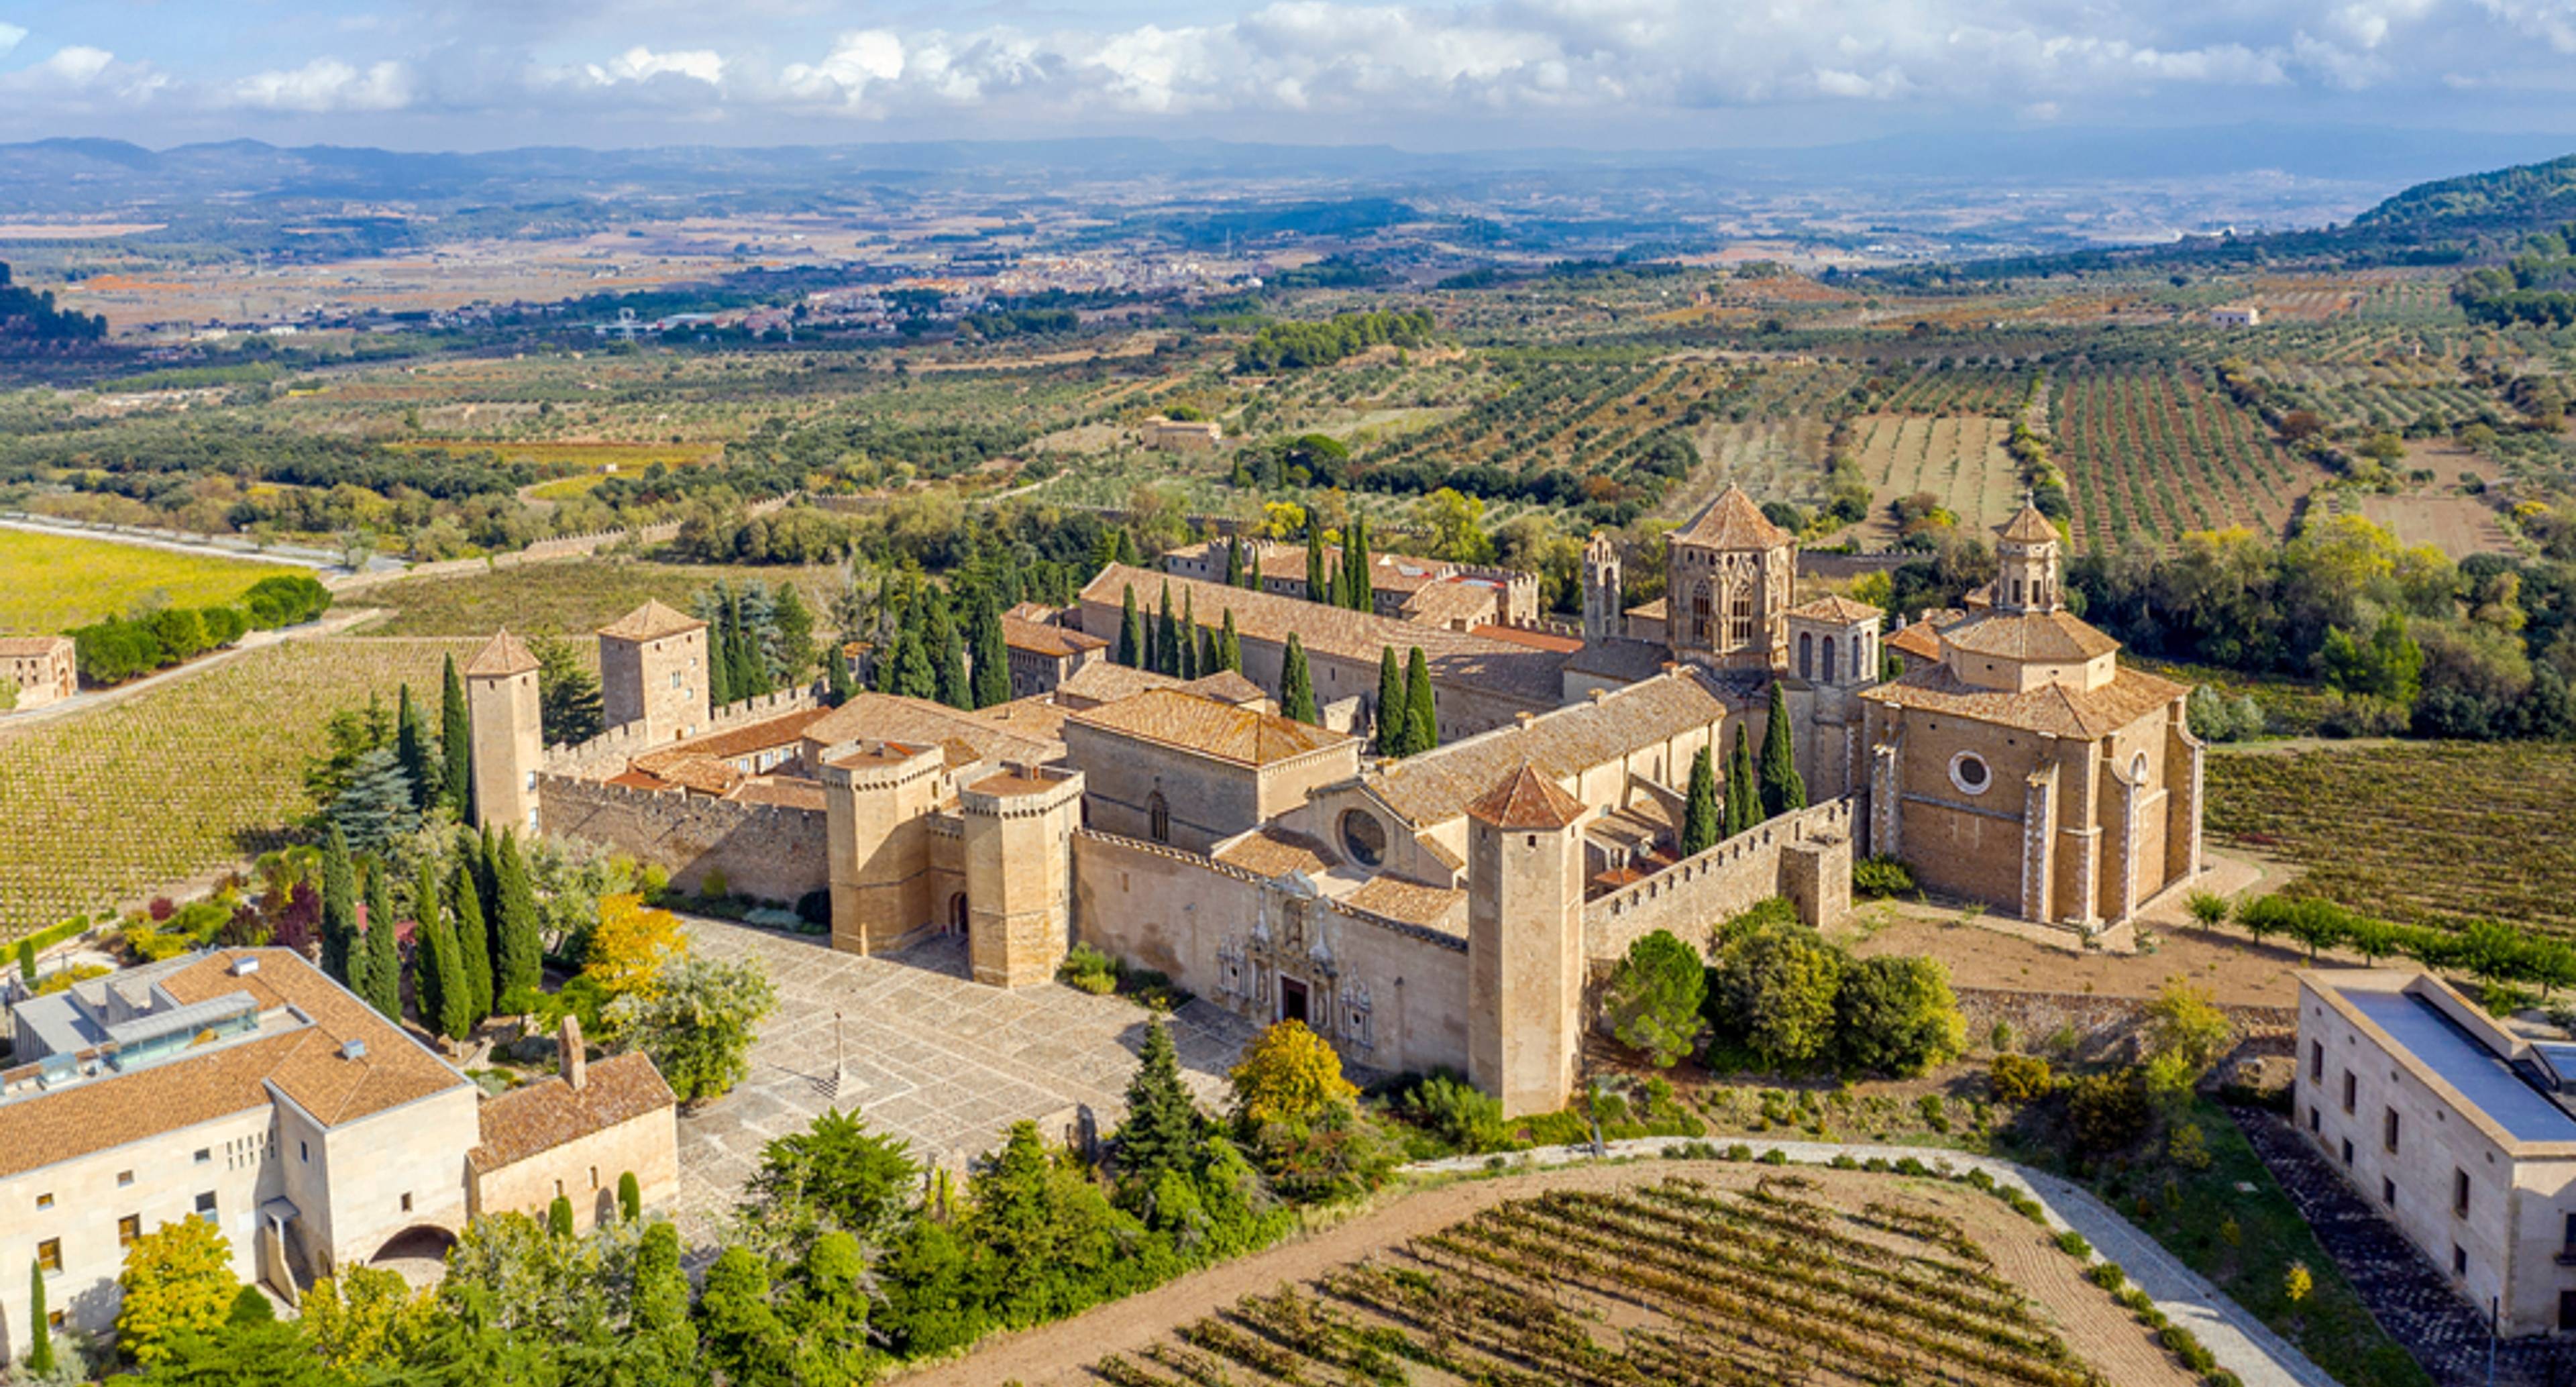 The Monastery of Poblet and Winding Roads